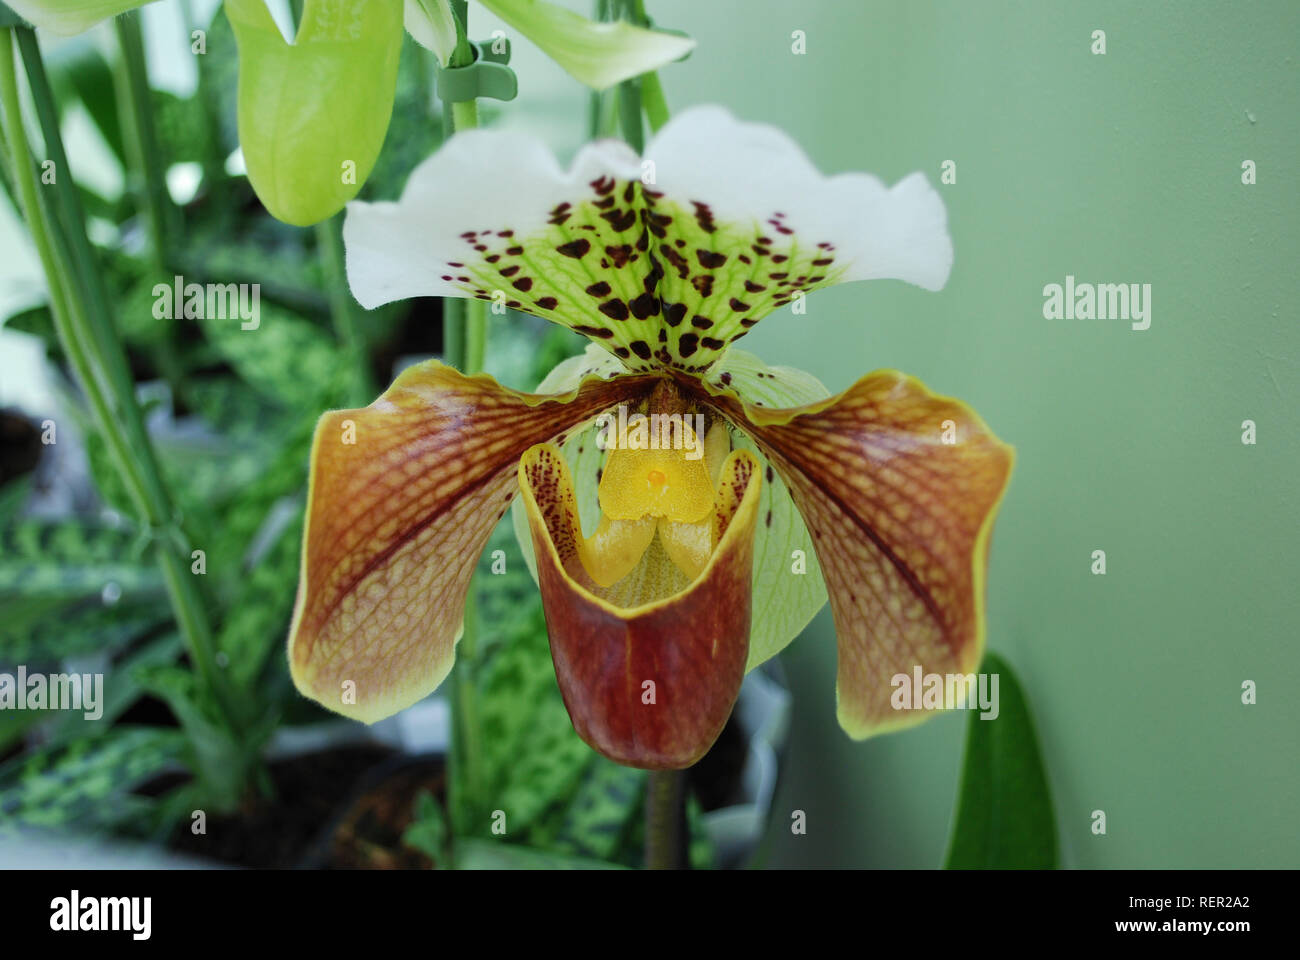 Orchid Paphiopedilum flower. Decorative plants for gardening and greenhouse. Stock Photo